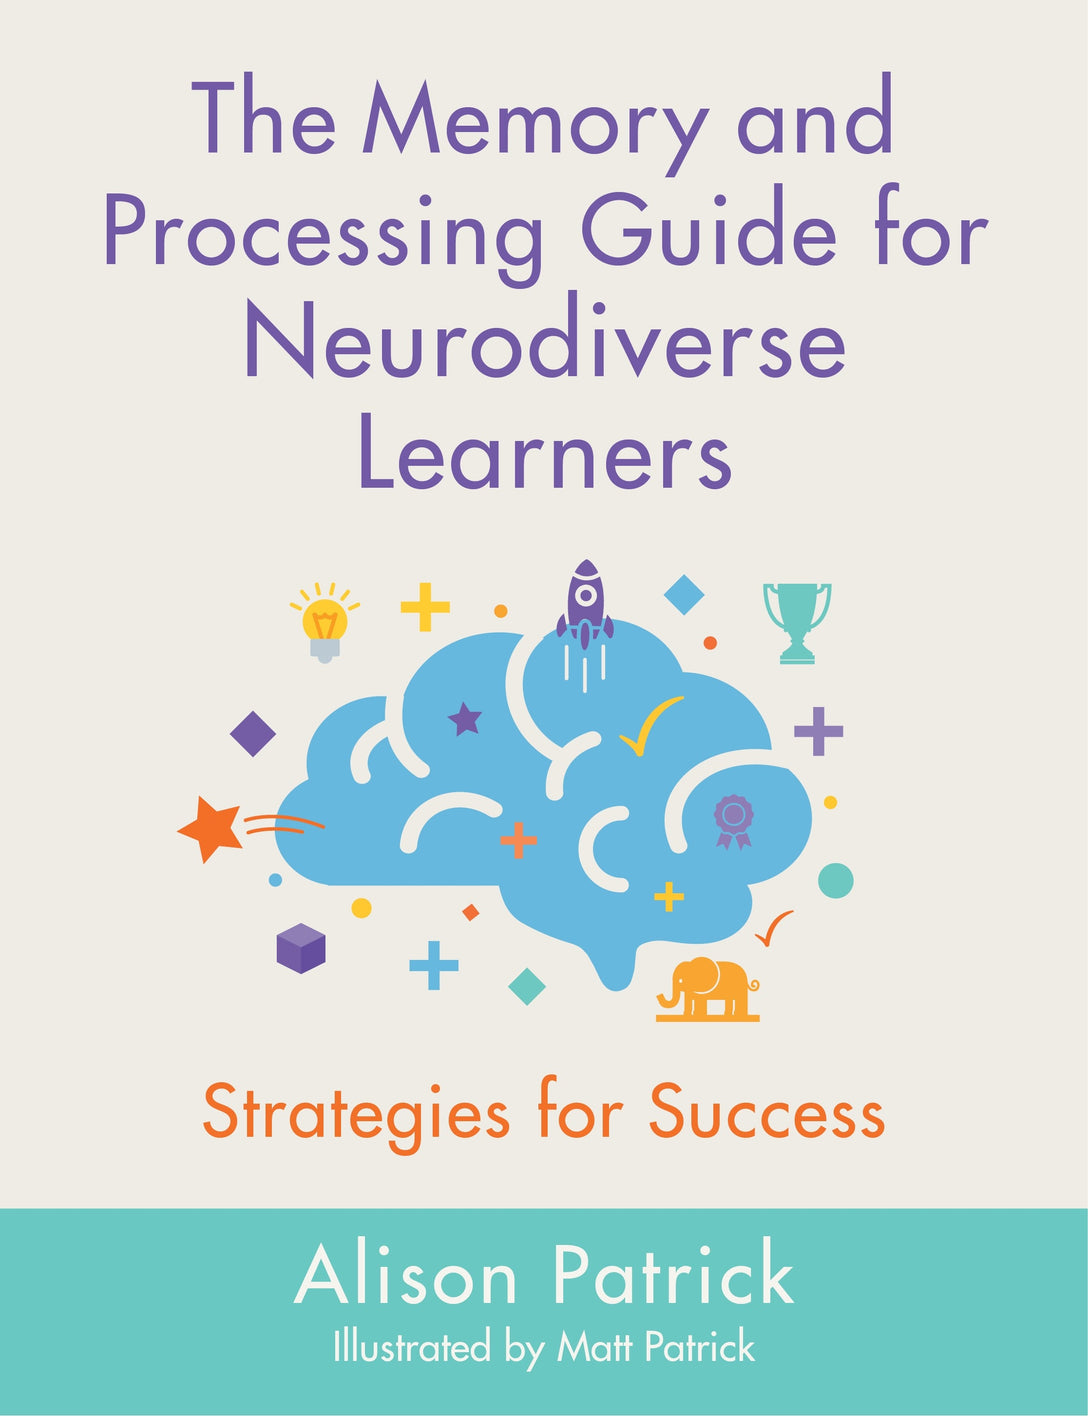 The Memory and Processing Guide for Neurodiverse Learners by Matt Patrick, Alison Patrick